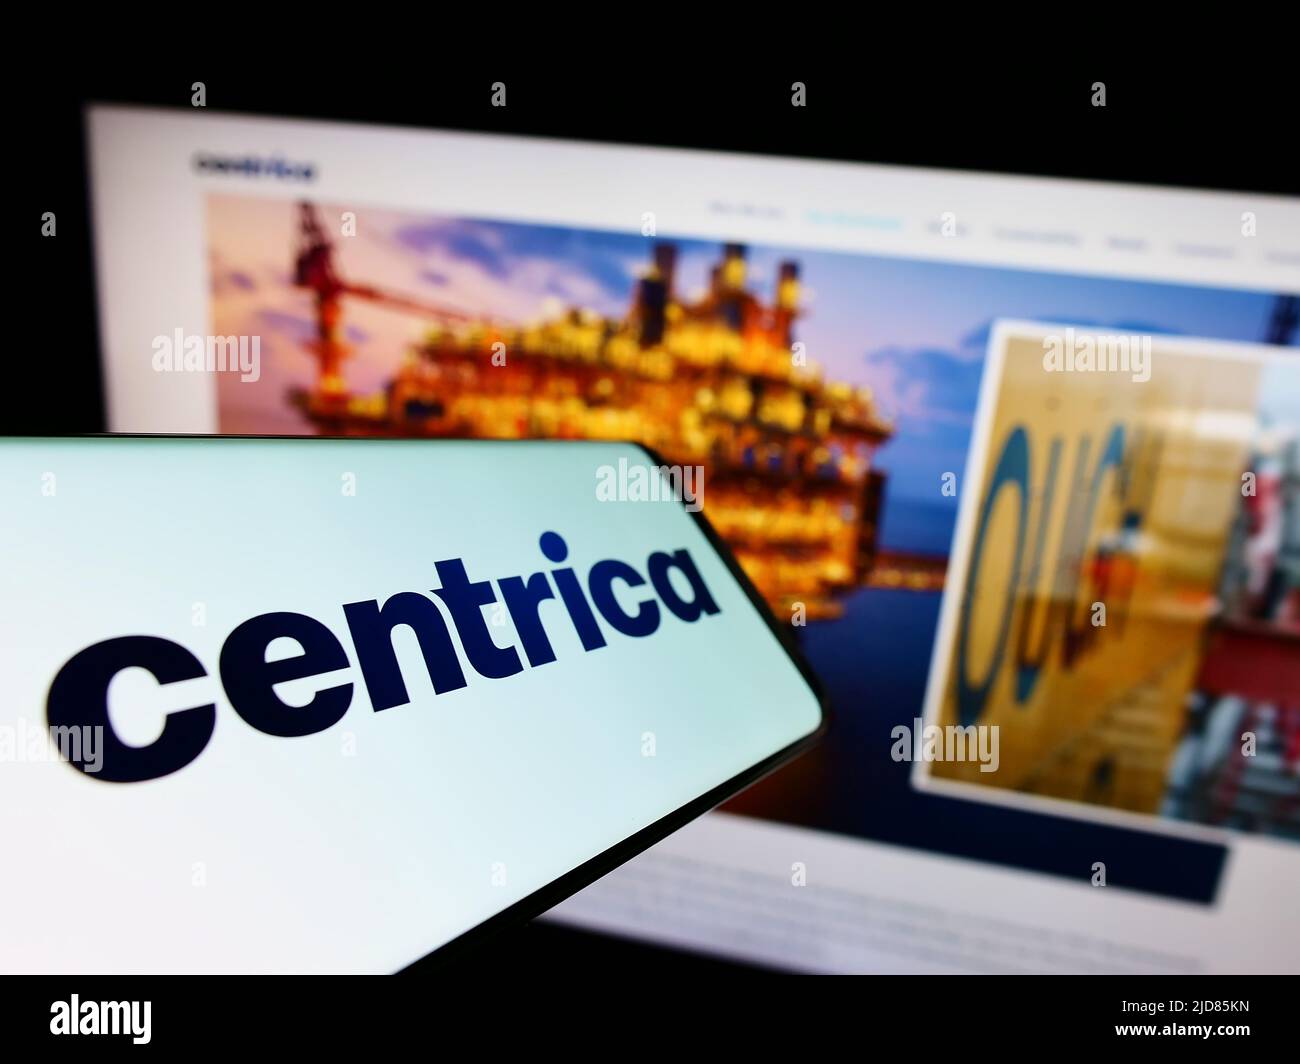 Smartphone with logo of British utility company Centrica plc on screen in front of business website. Focus on center of phone display. Stock Photo